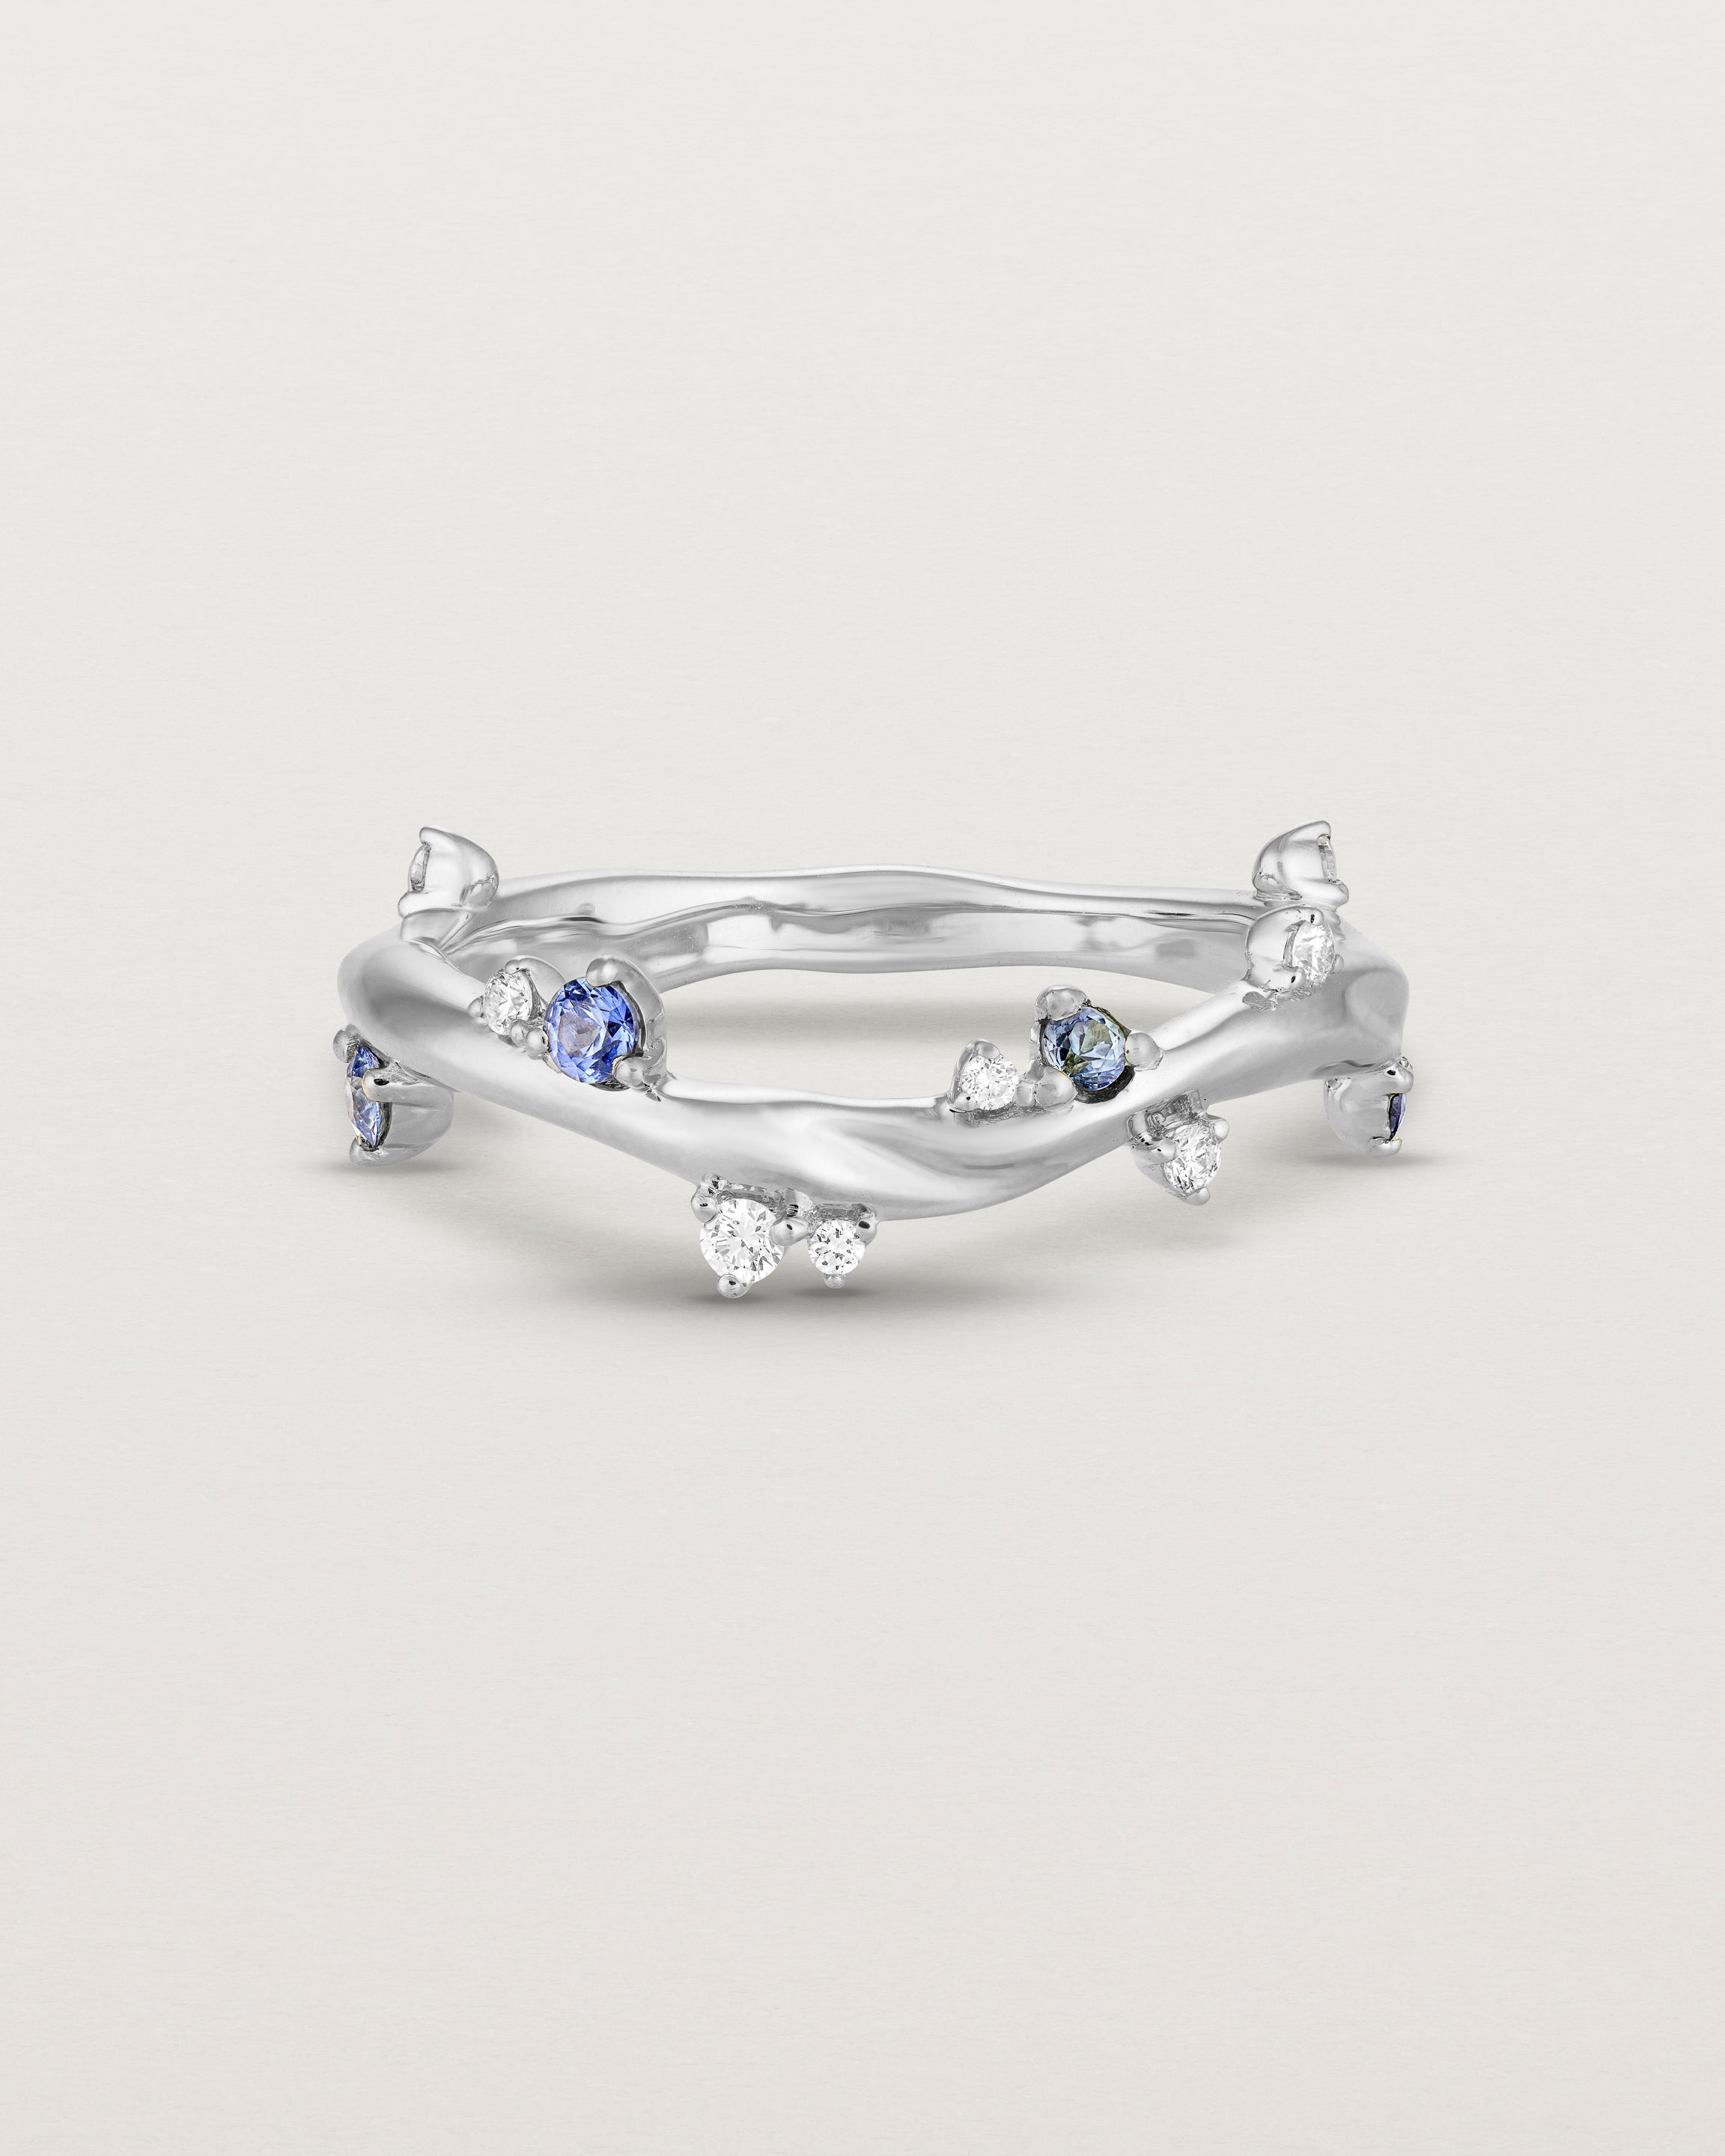 Front image of the Ember ring in white gold featuring a scattering of white diamonds and blue sapphires.